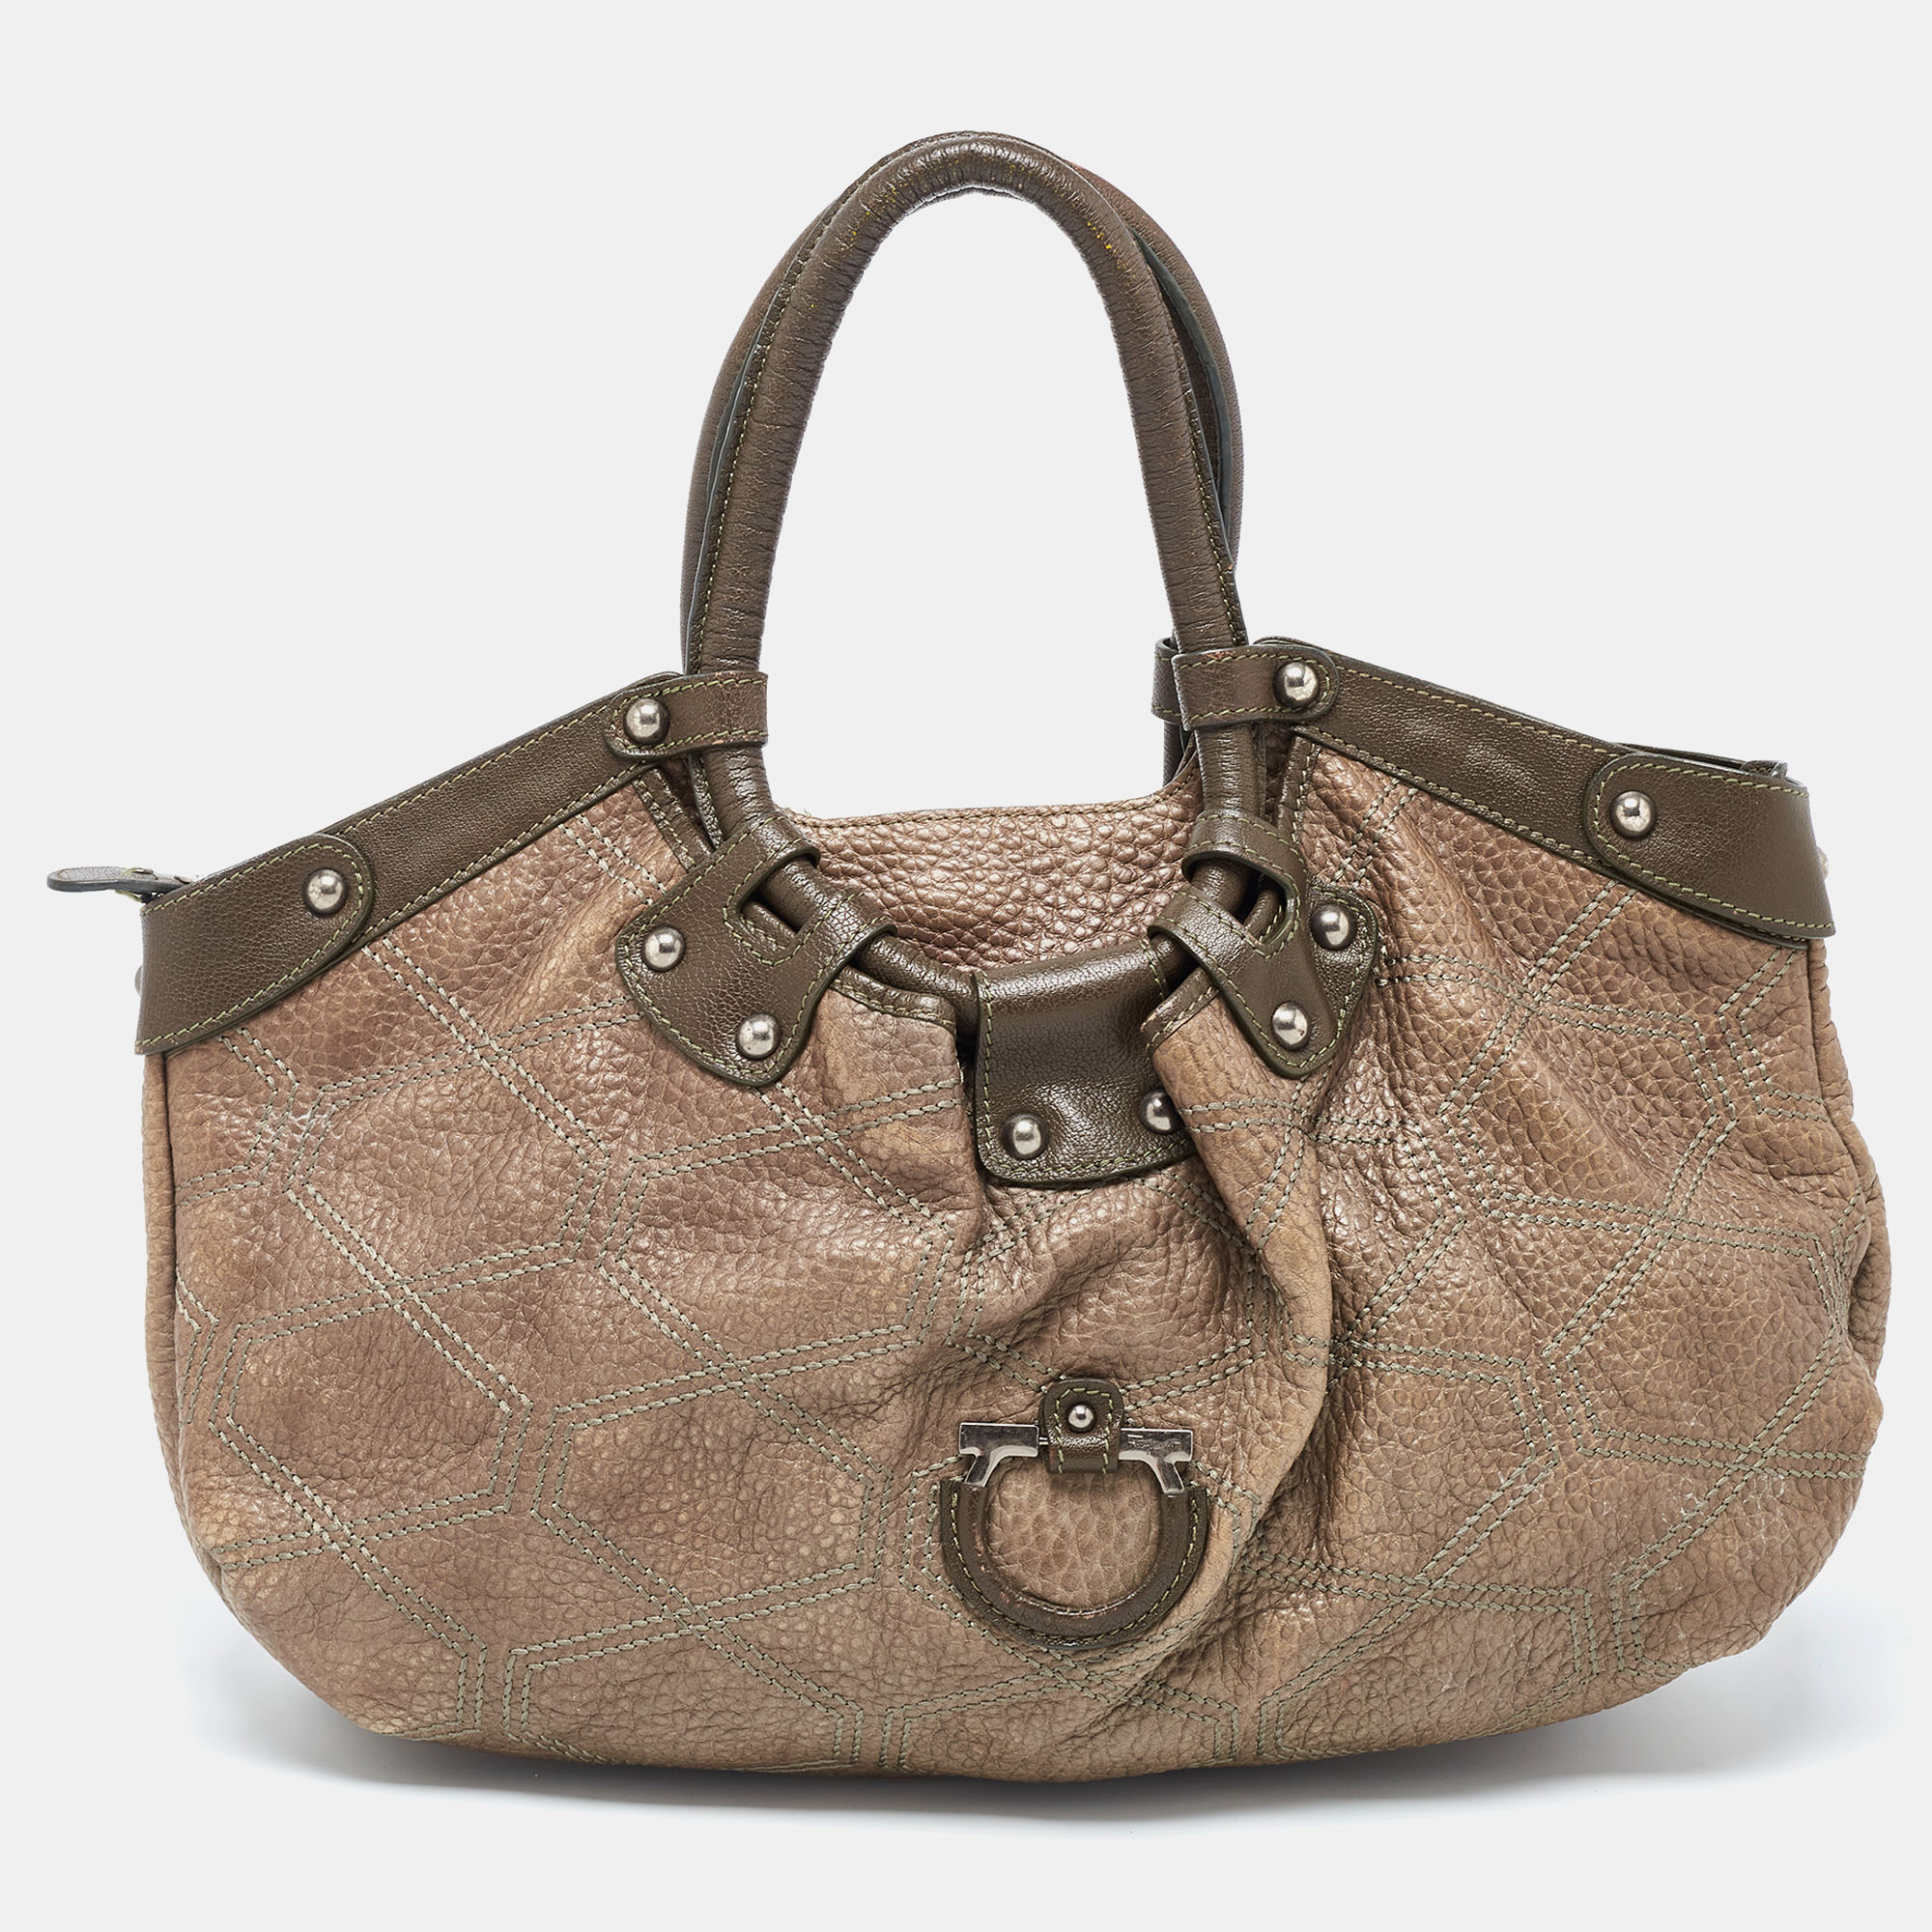 Salvatore Ferragamo Olive Green Quilted Leather Gancini Hobo